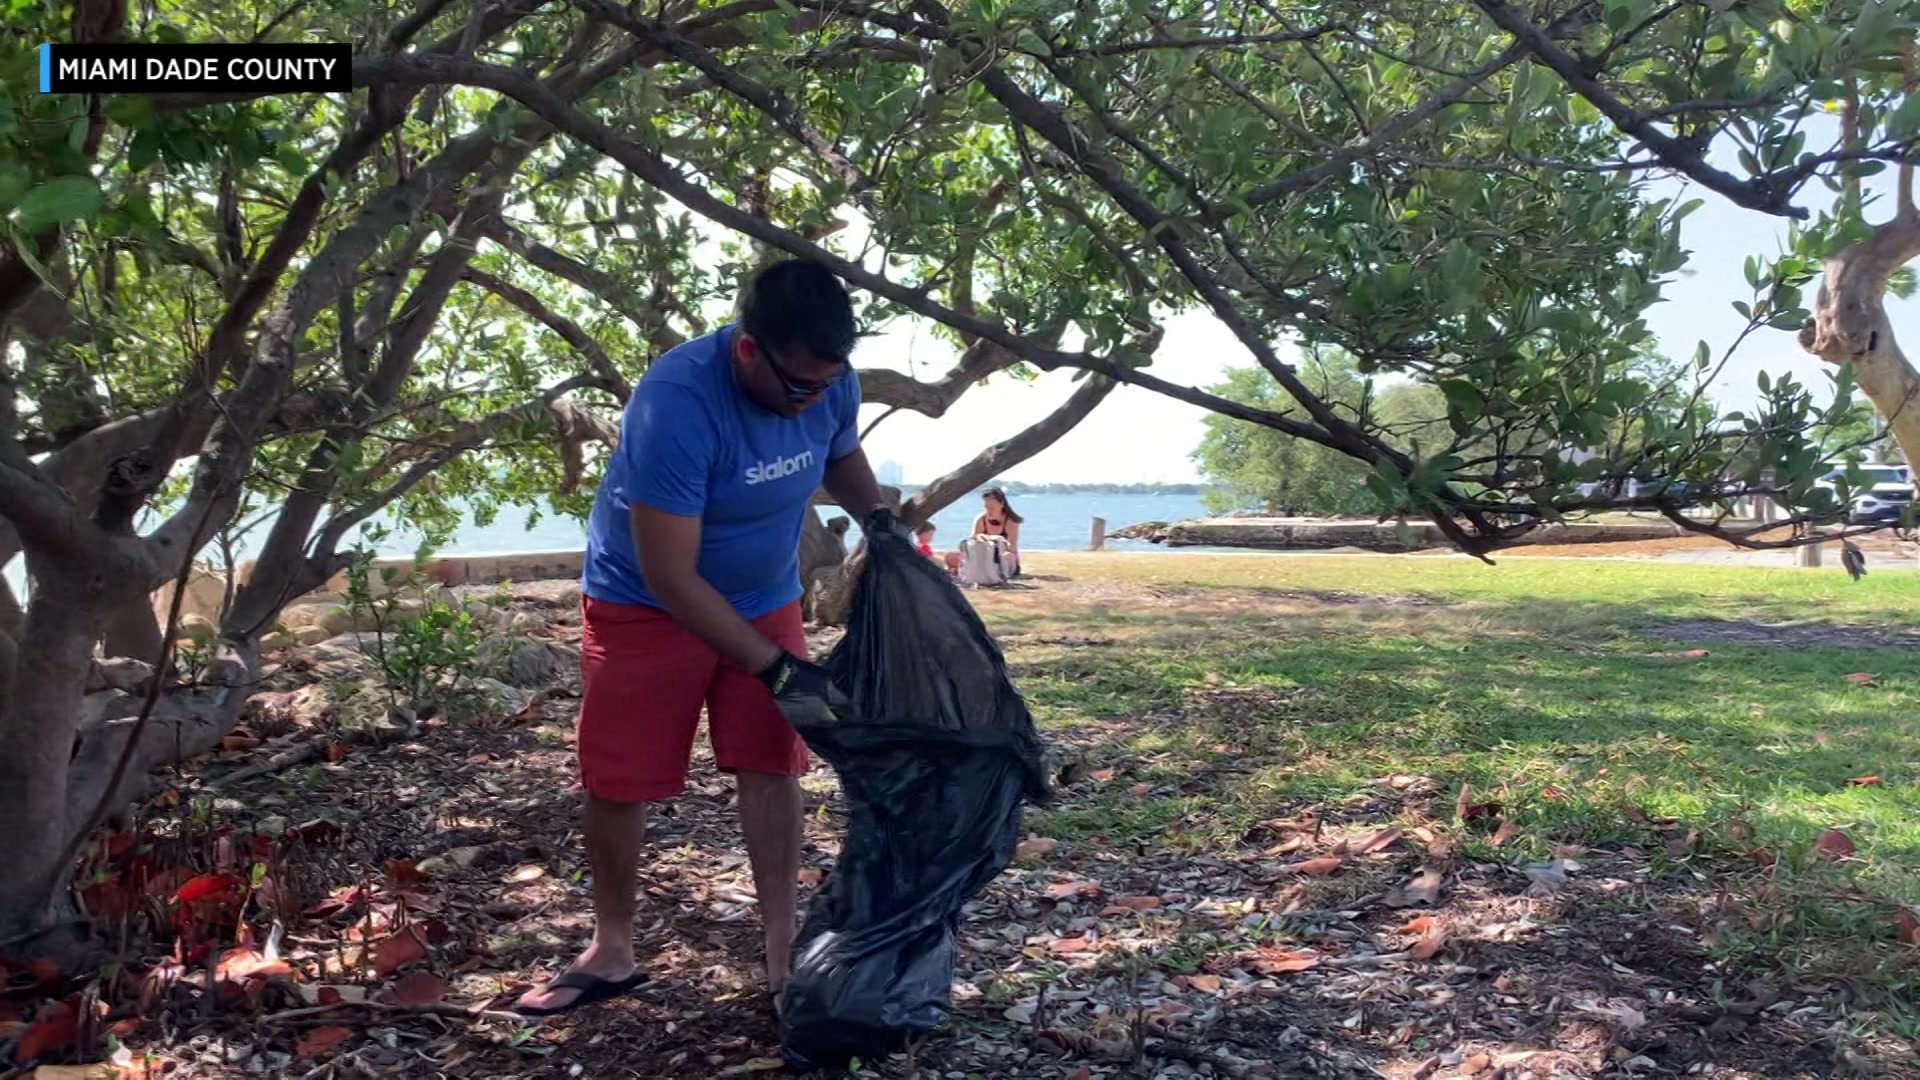 Miami-Dade County Celebrates 40 Years Of The Baynanza Biscayne Bay Cleanup Day